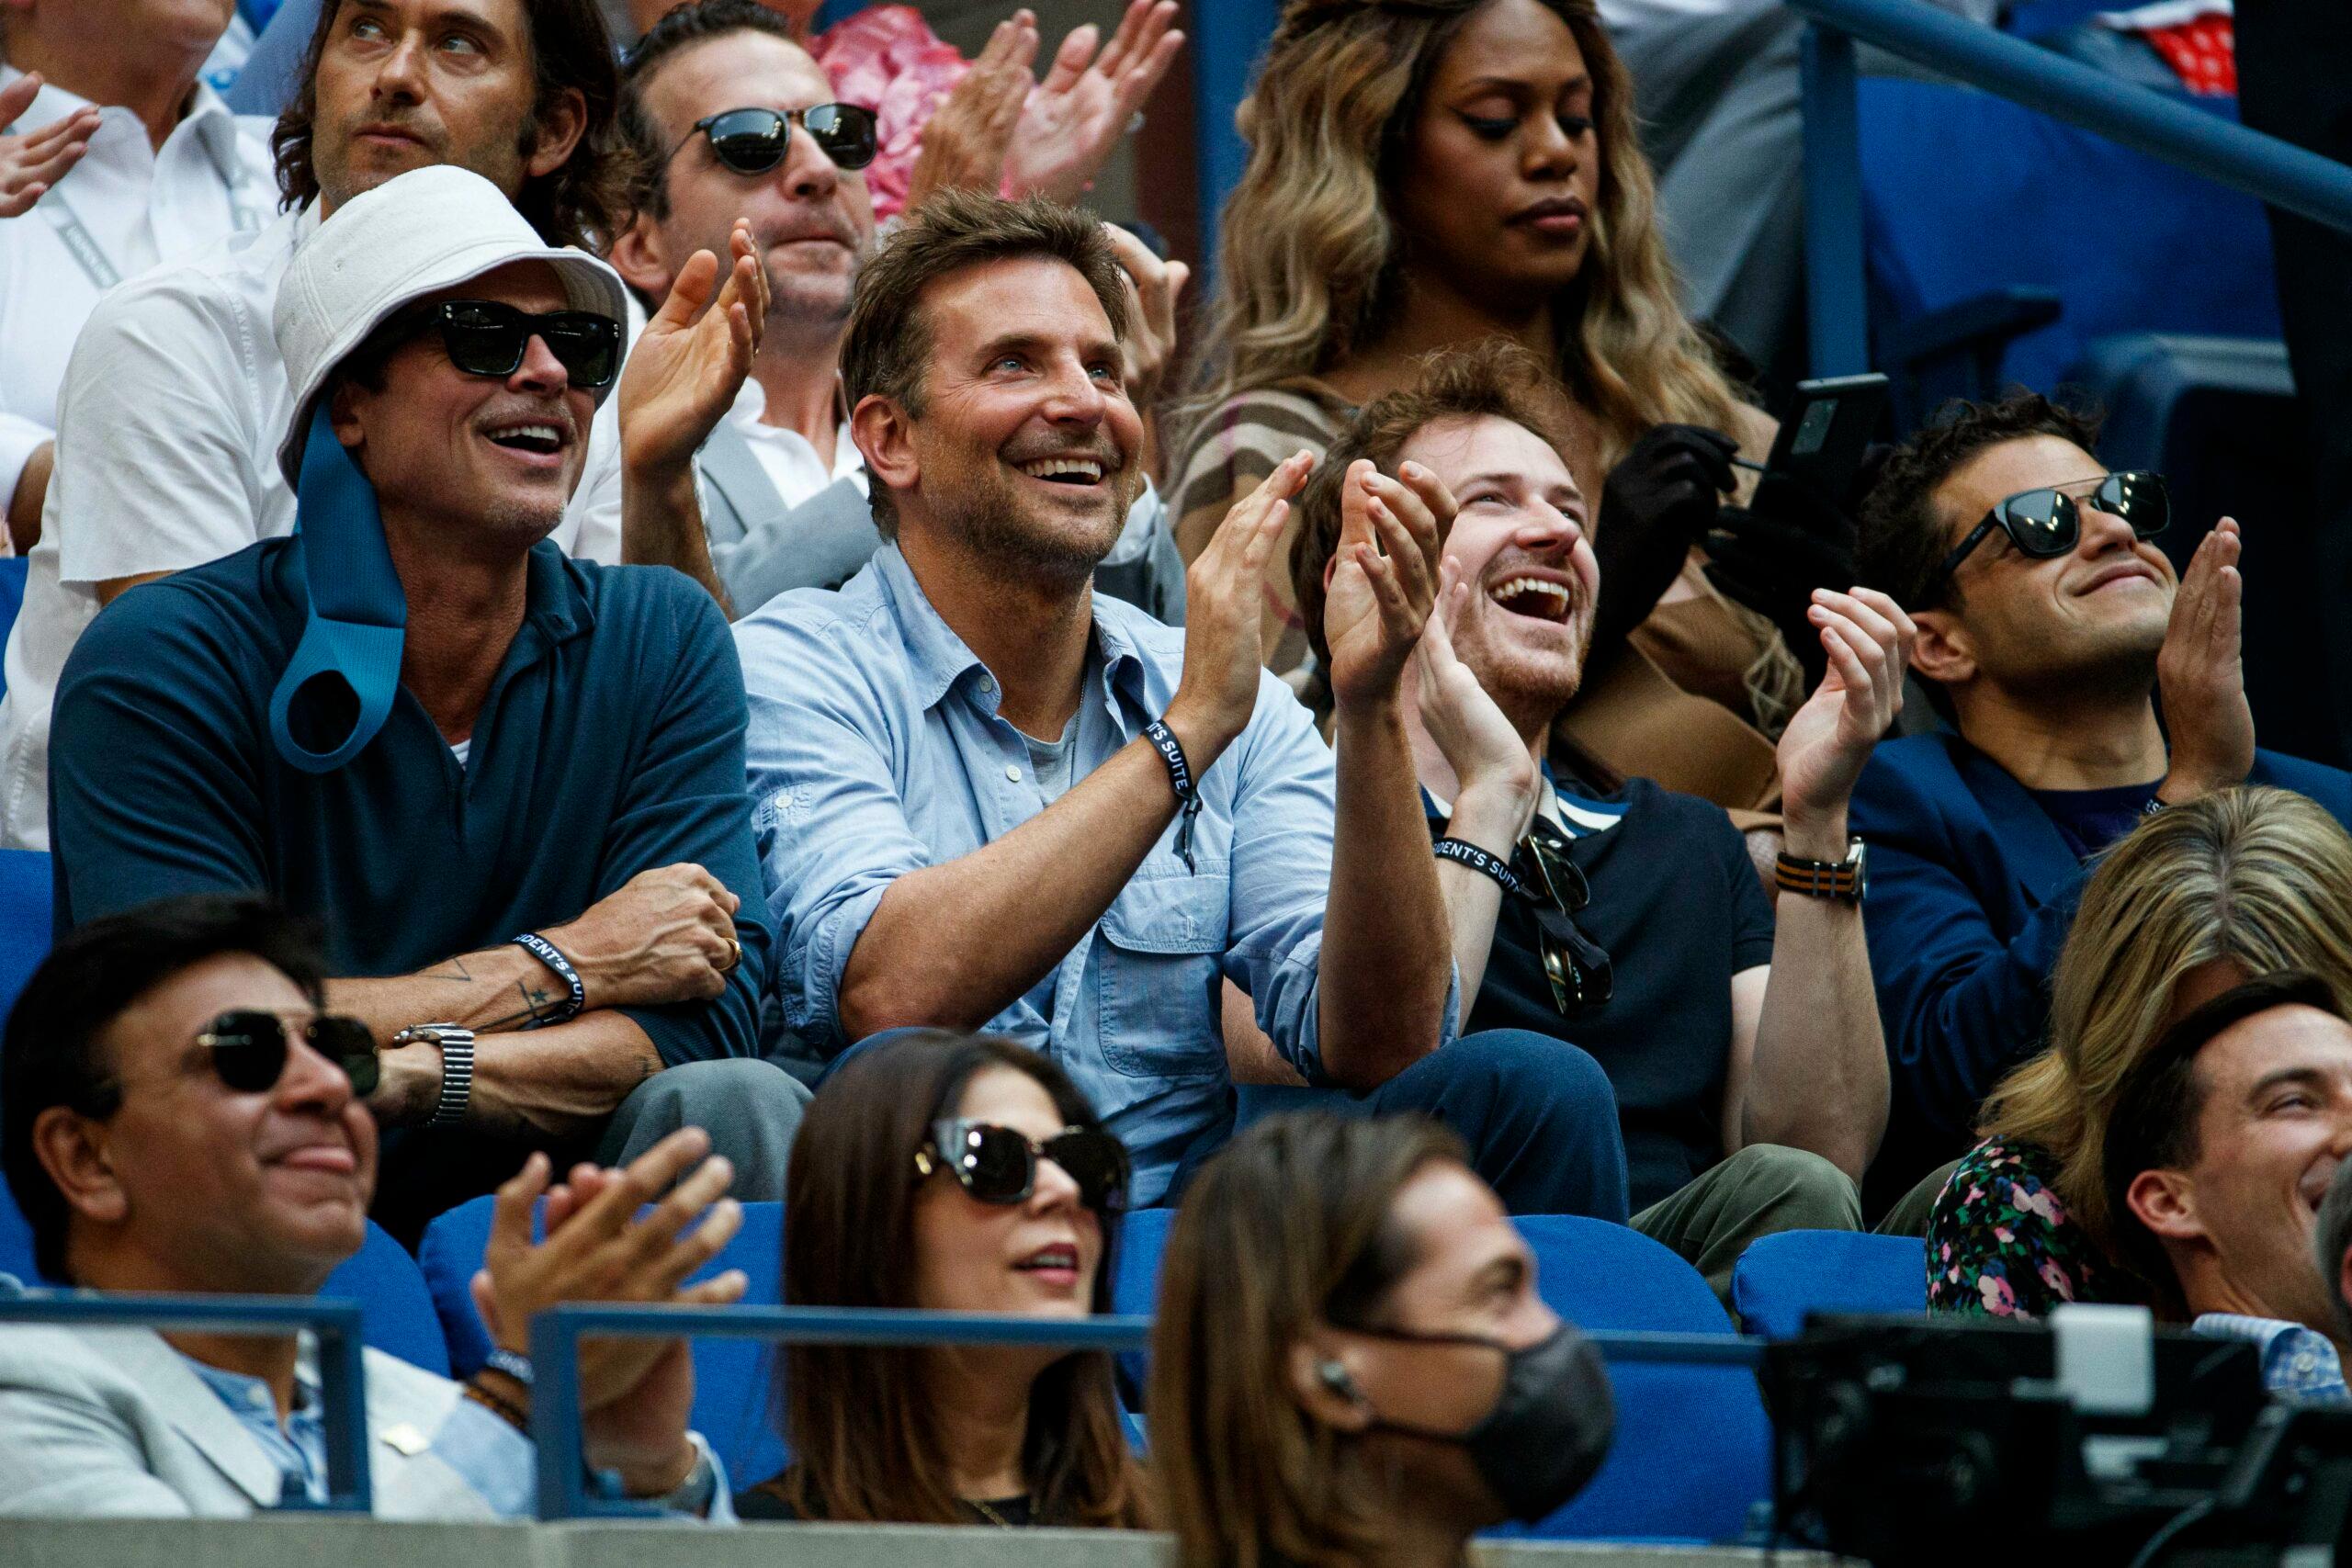 Brad Pitt and Bradley Cooper are pictured during the men apos s finals match of the US Open at the Arthur Ashe Stadium